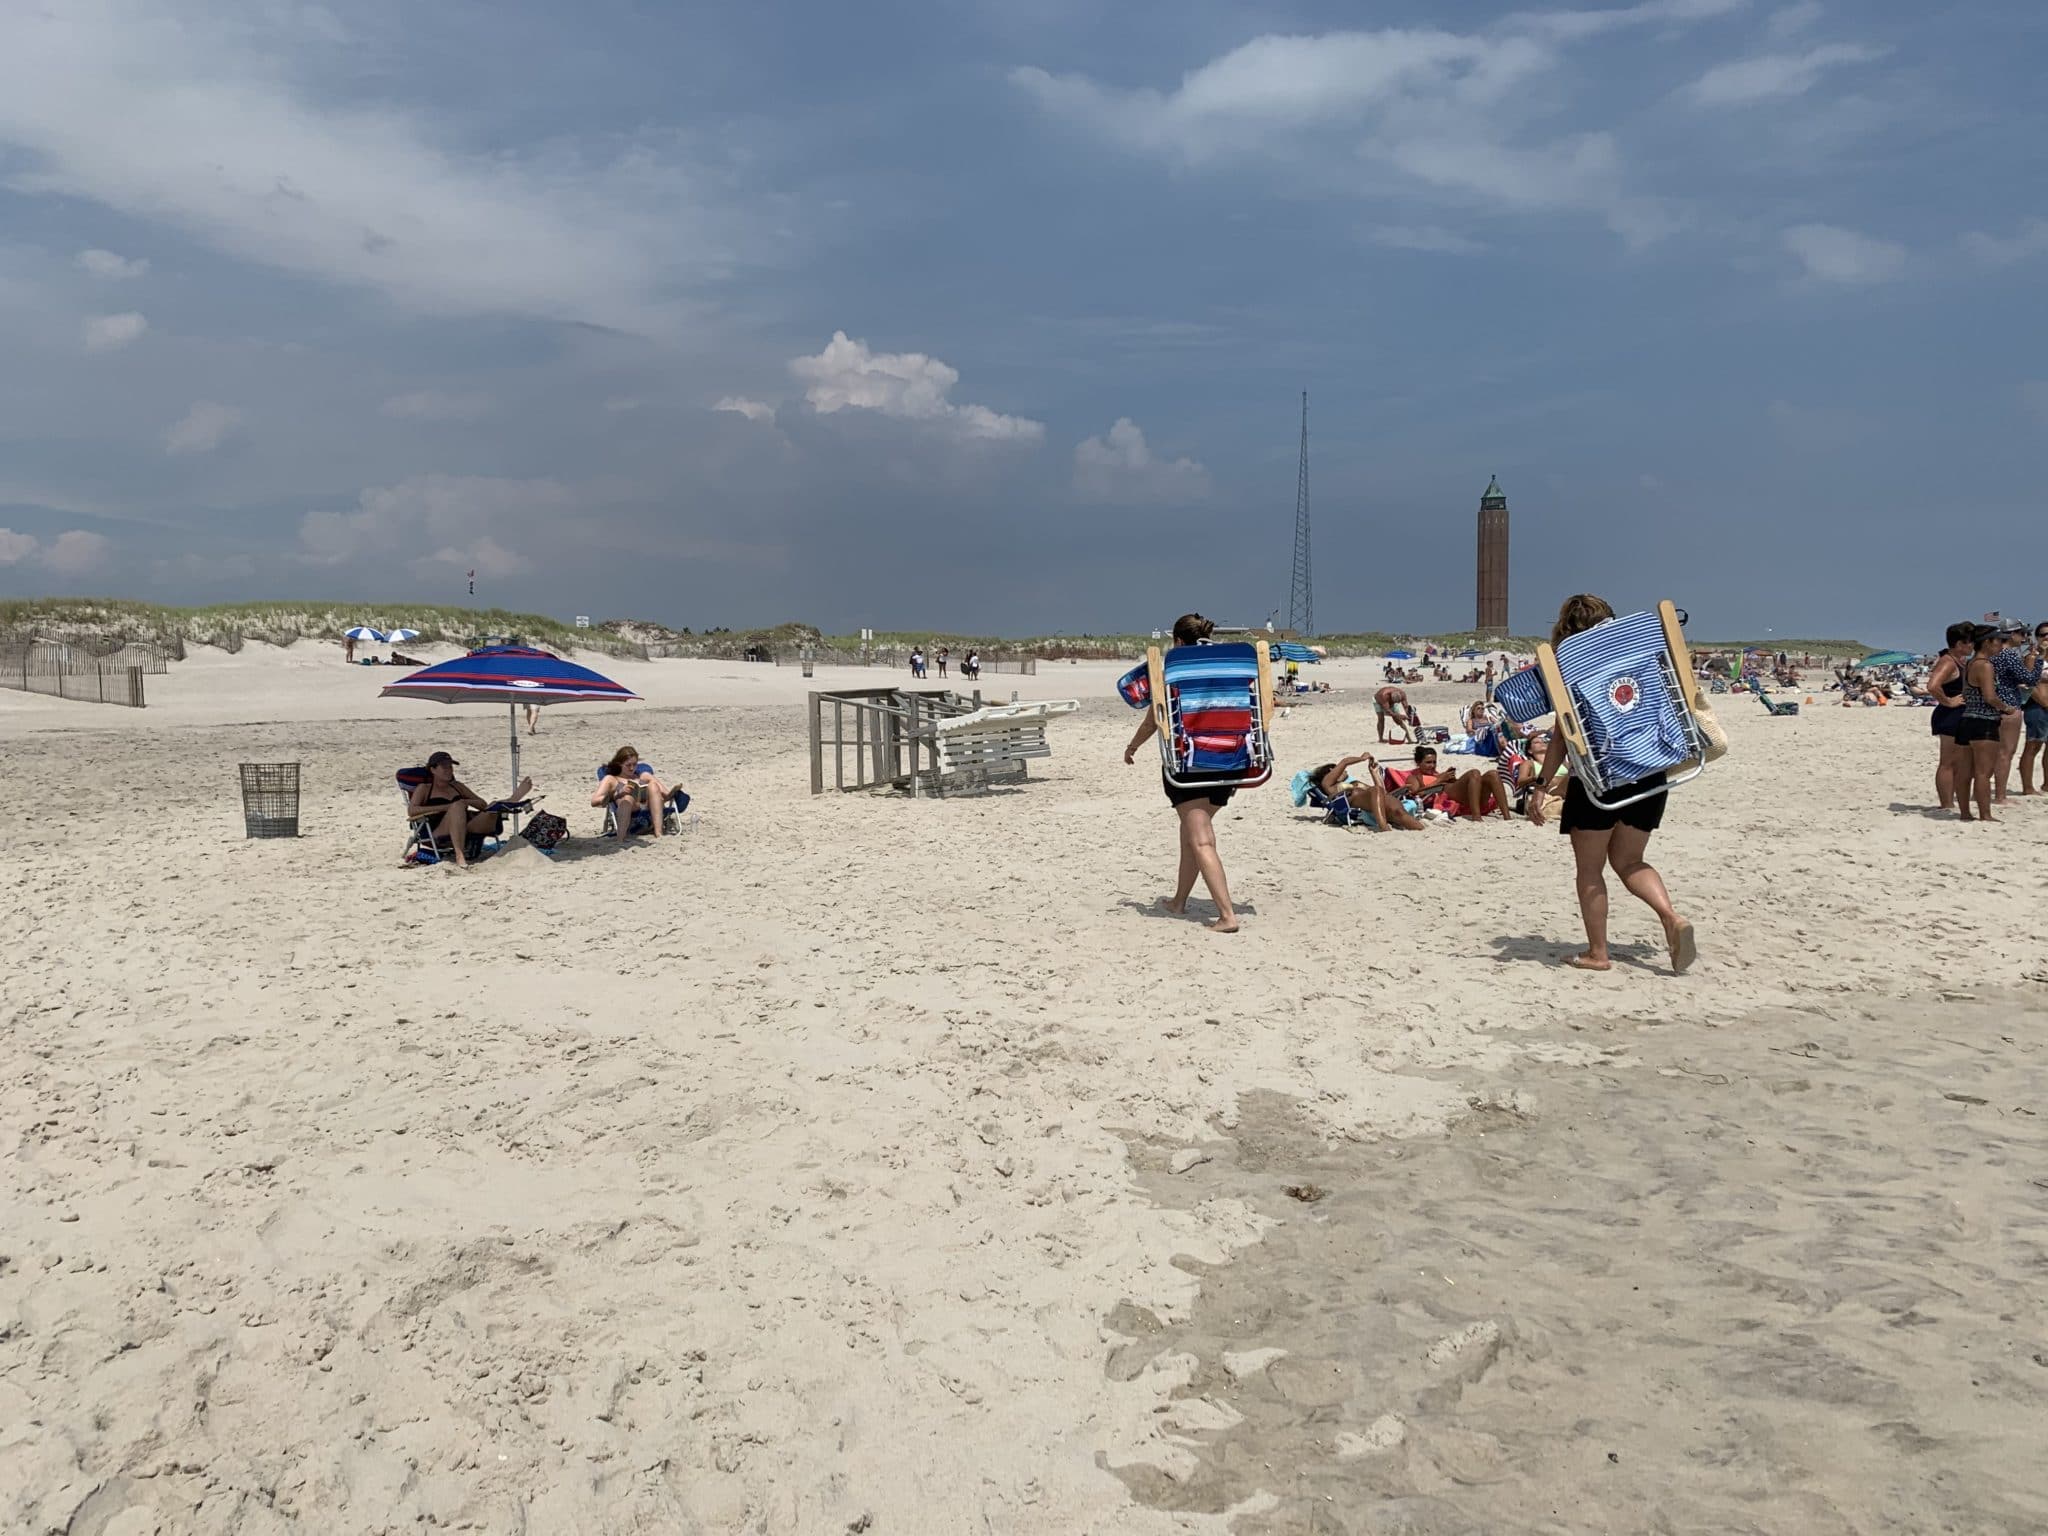 People lounging, standing and not wearing masks on the beach at Robert Moses State Park, Babylon Long Island. Photo by ConsumerMojo.com